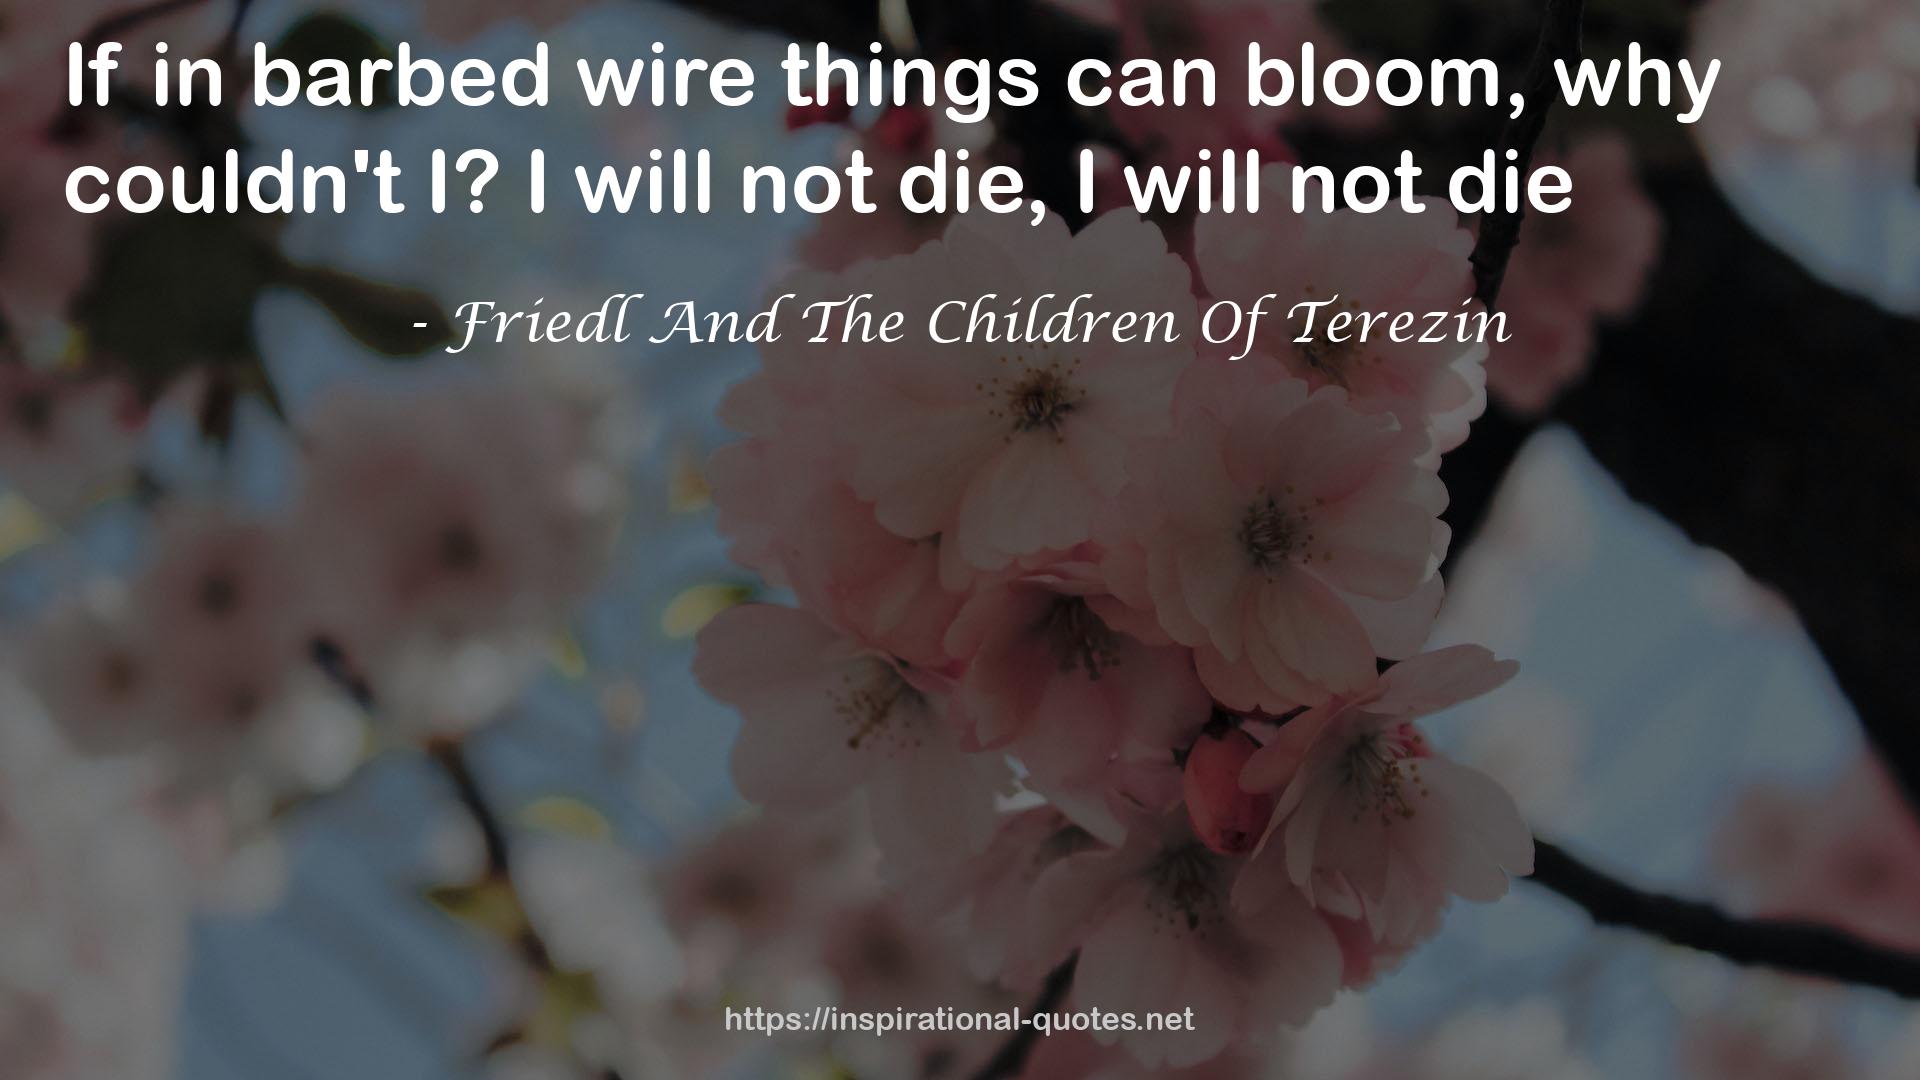 Friedl And The Children Of Terezin QUOTES